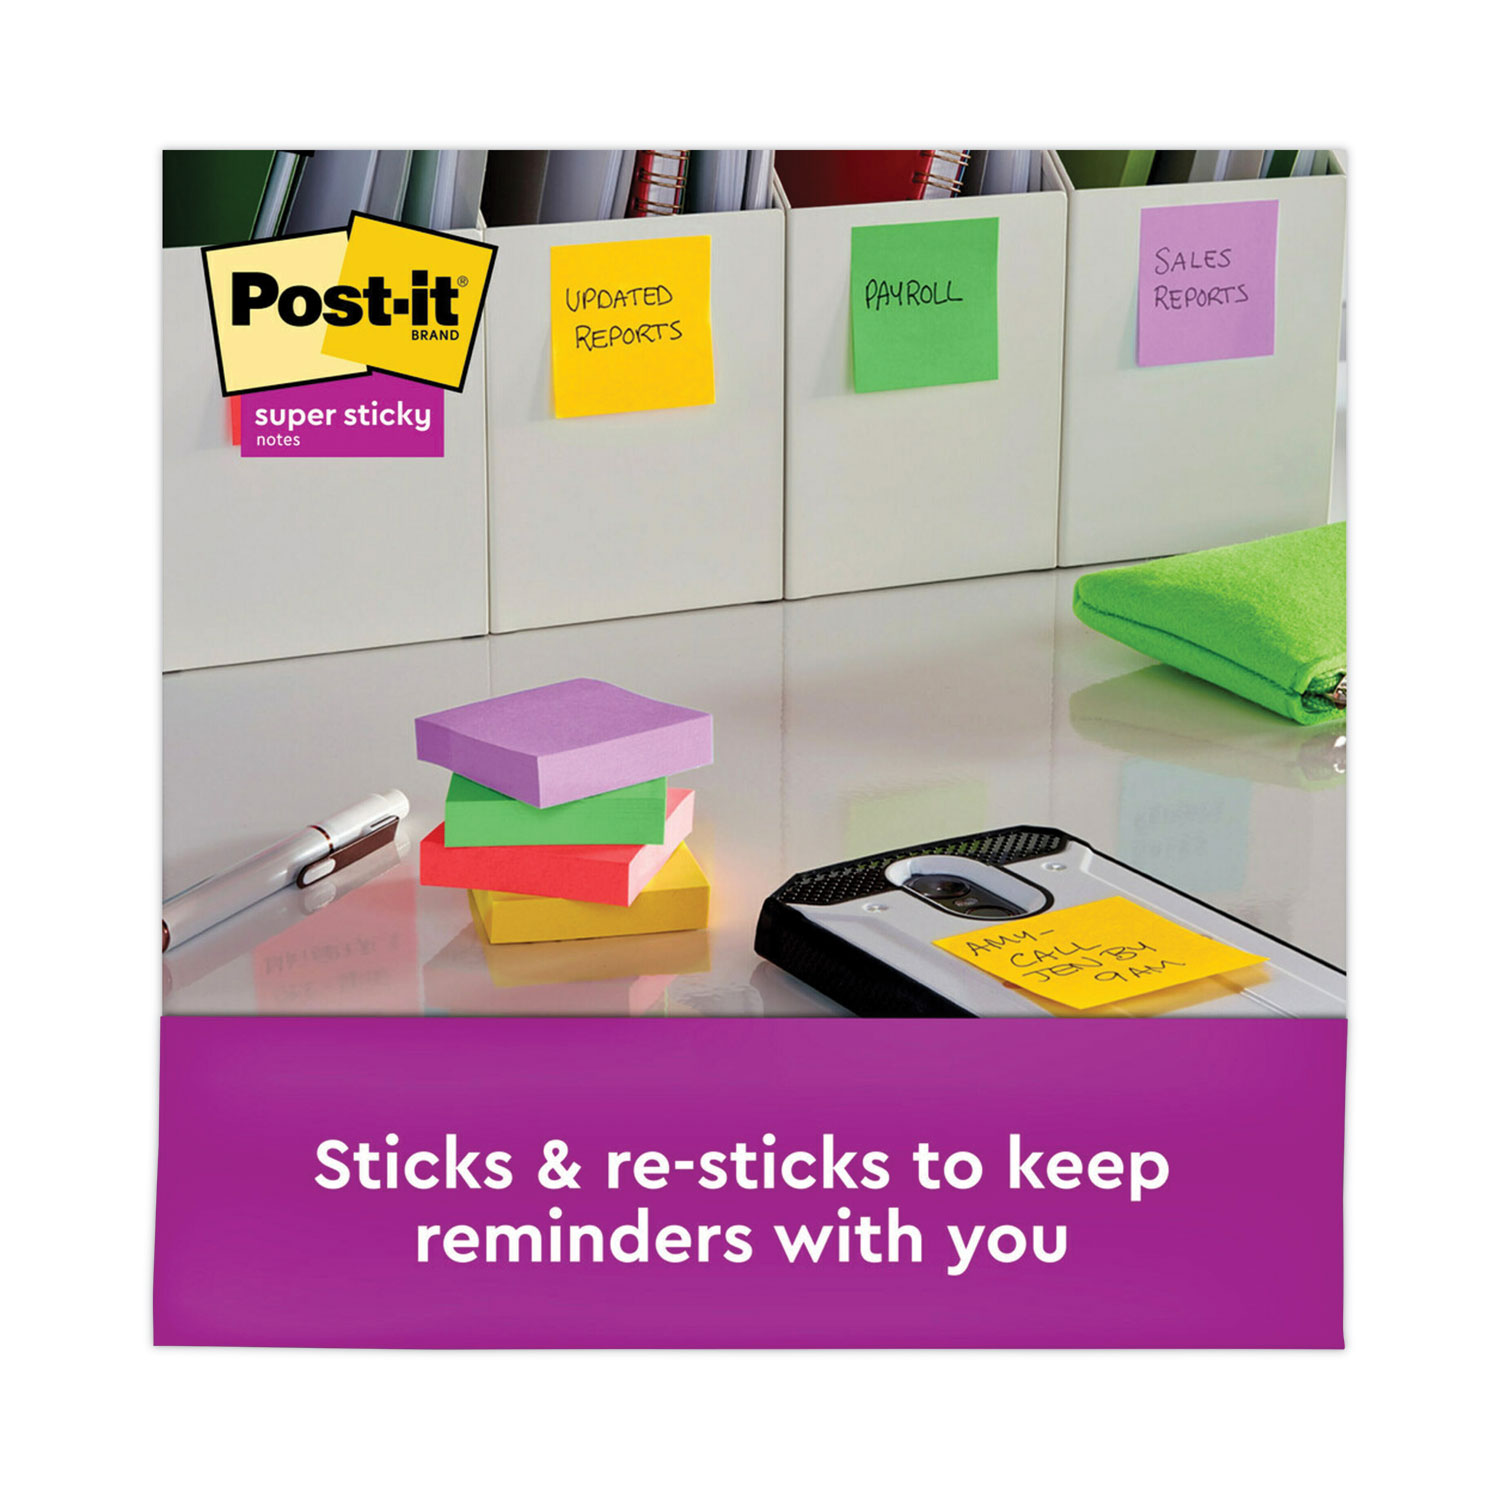 Post-it Super Sticky Notes, 2 x 2, Playful Primaries Collection